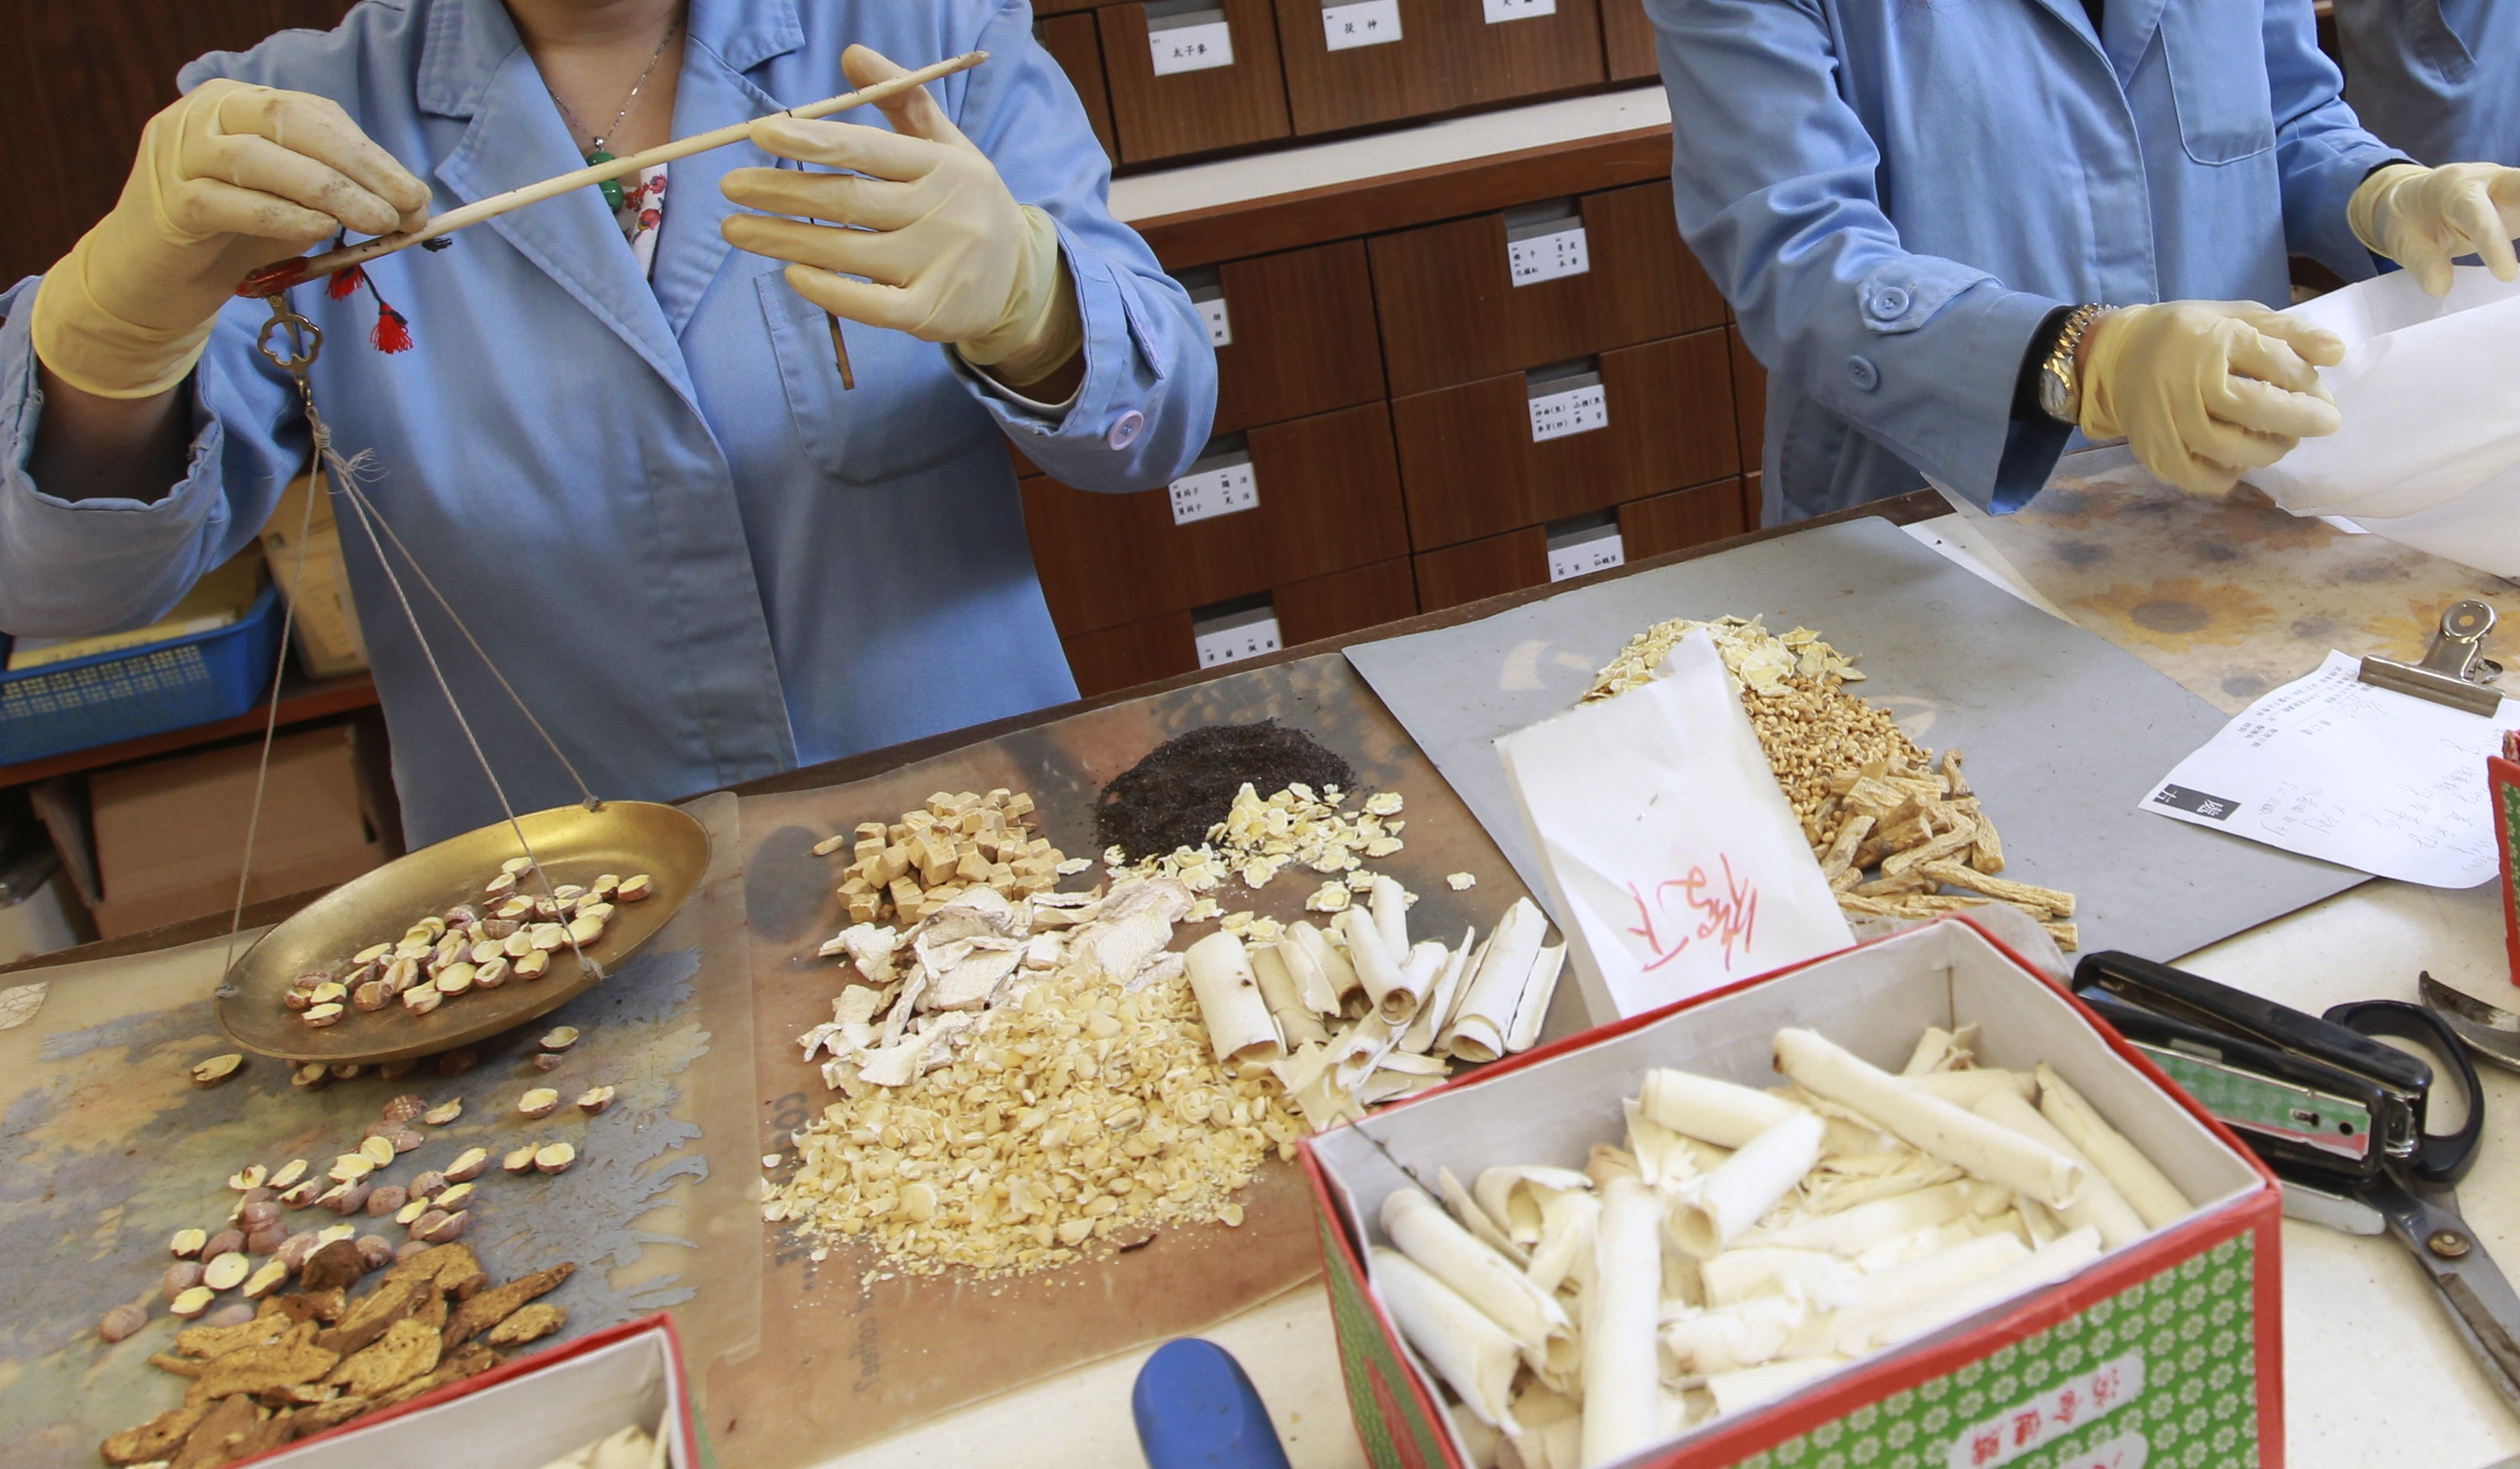 Practitioners of traditional Chinese medicine think that Hongkongers could benefit from more direct collaboration between TCM and Western medicine. Photo: Dickson Lee